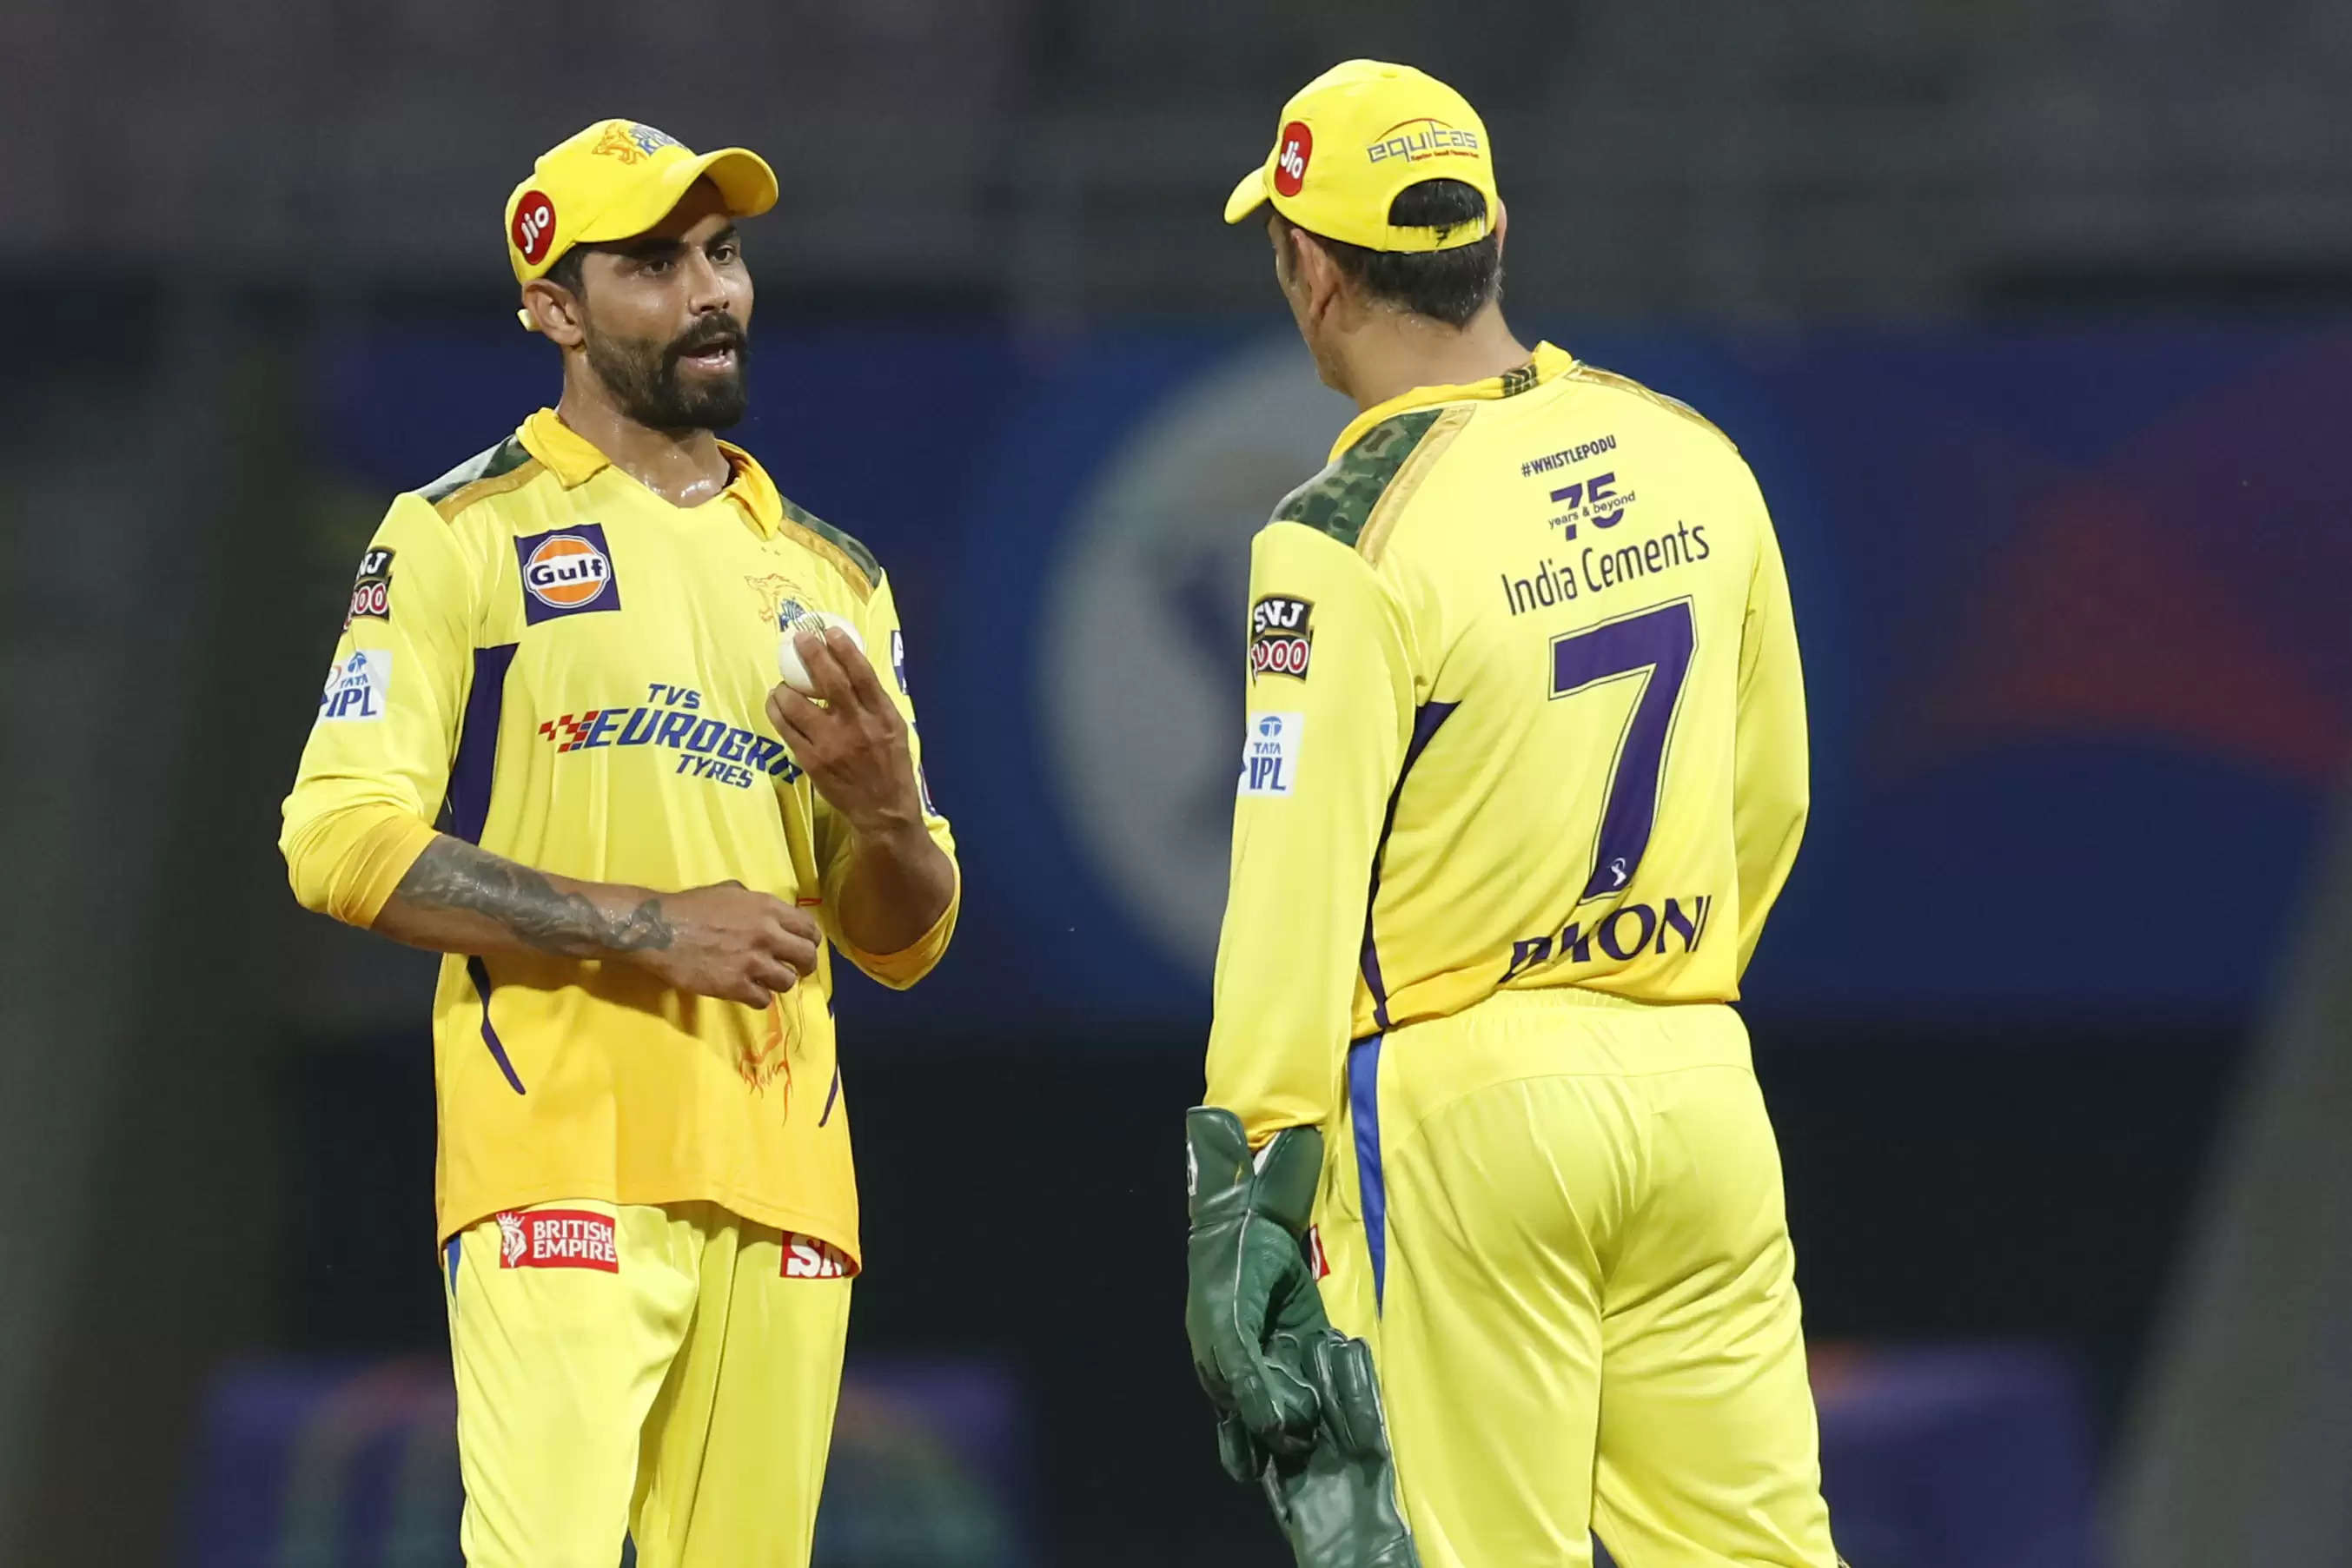 IPL 2023 Trading Window to open in November, Ravindra Jadeja and others set to be listed for trading: IPL 2023 Auction, Follow IPL 2023 LIVE Updates